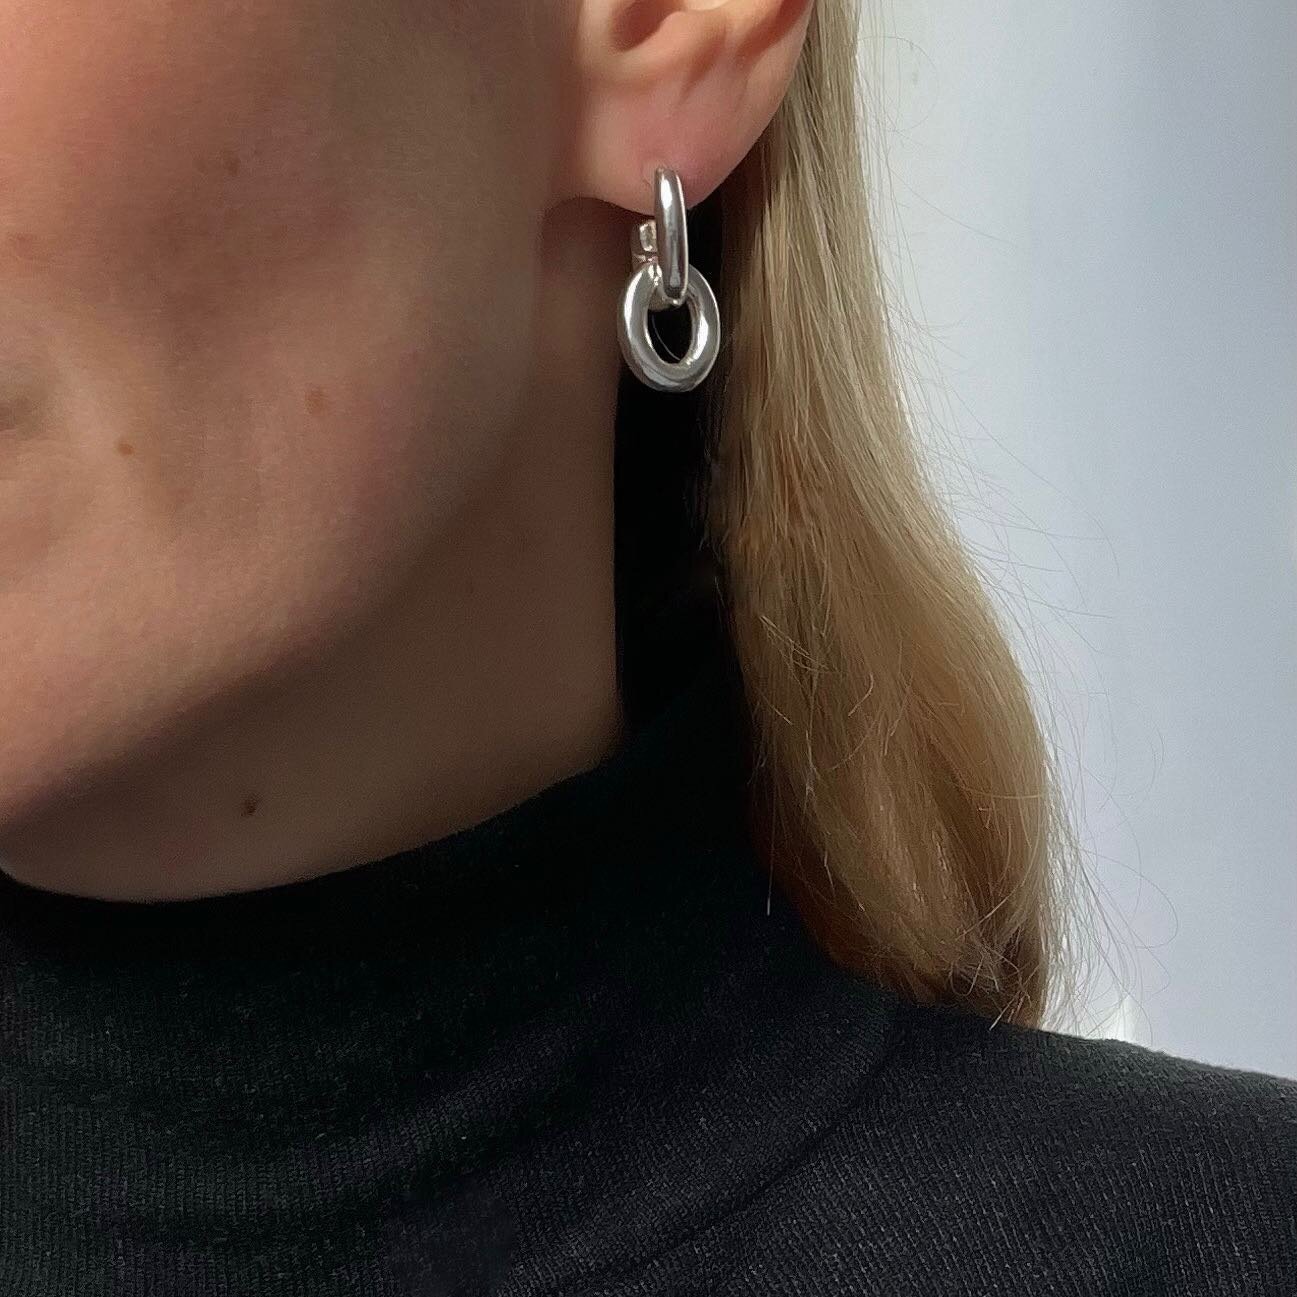 There&rsquo;s something about silver right now&hellip; just one of the many Go Go Earring combos ⛓️